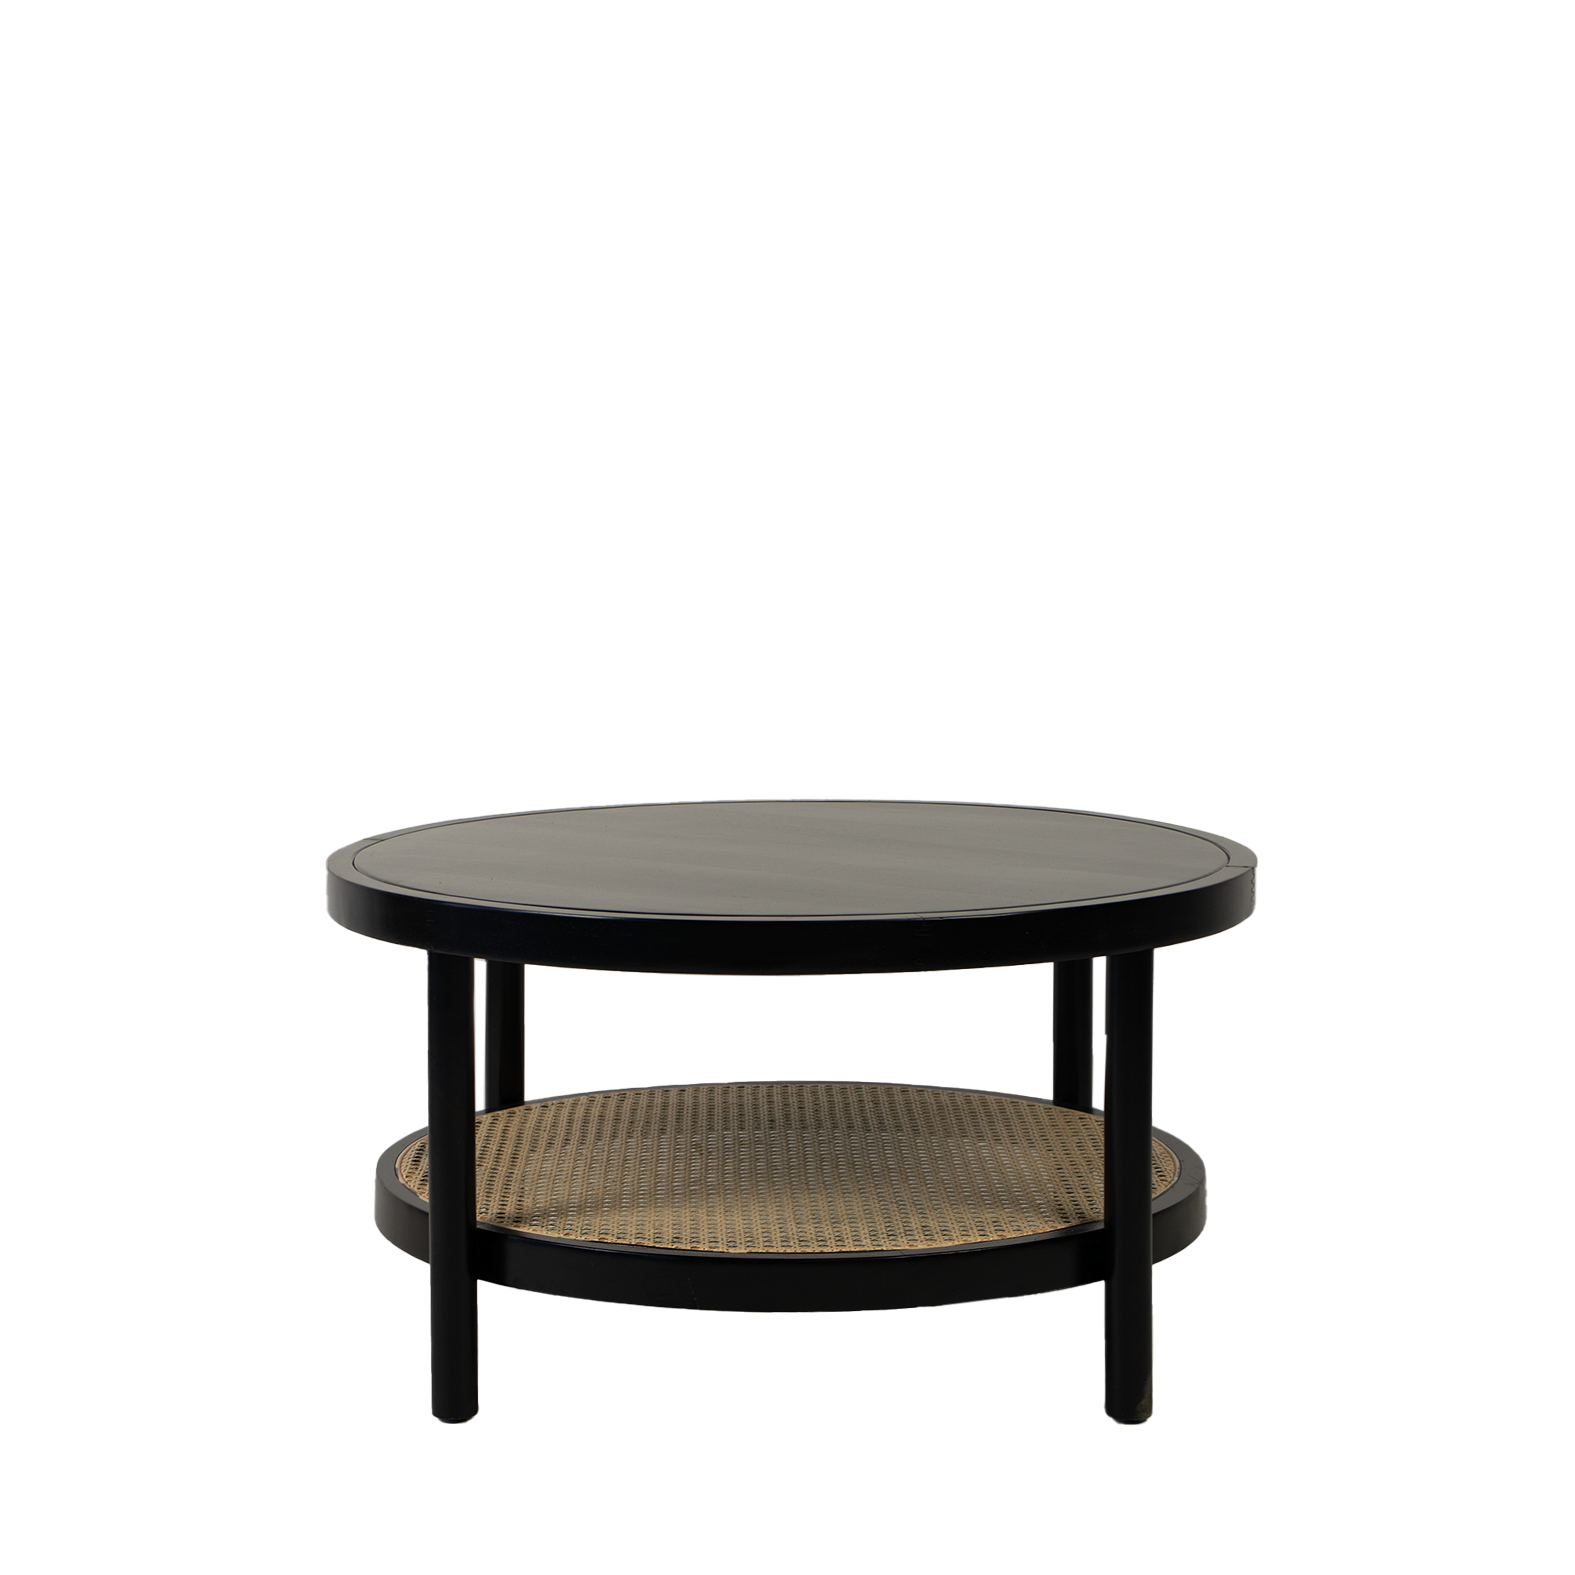 Black and Rattan Round Table Hire